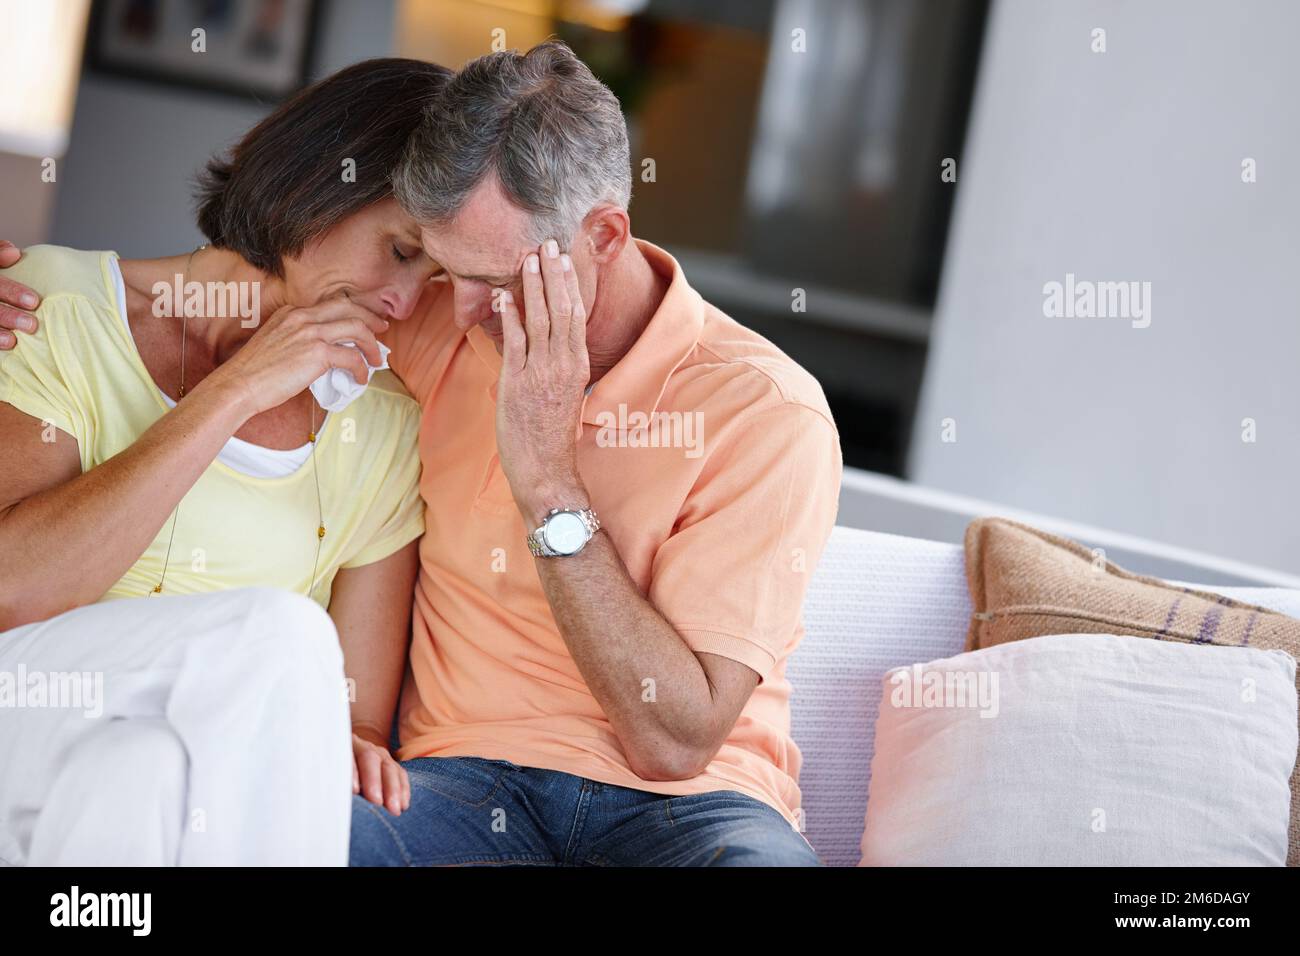 Dealing with their grief together. a mature married couple looking sad and distraught while sitting beside ach other. Stock Photo